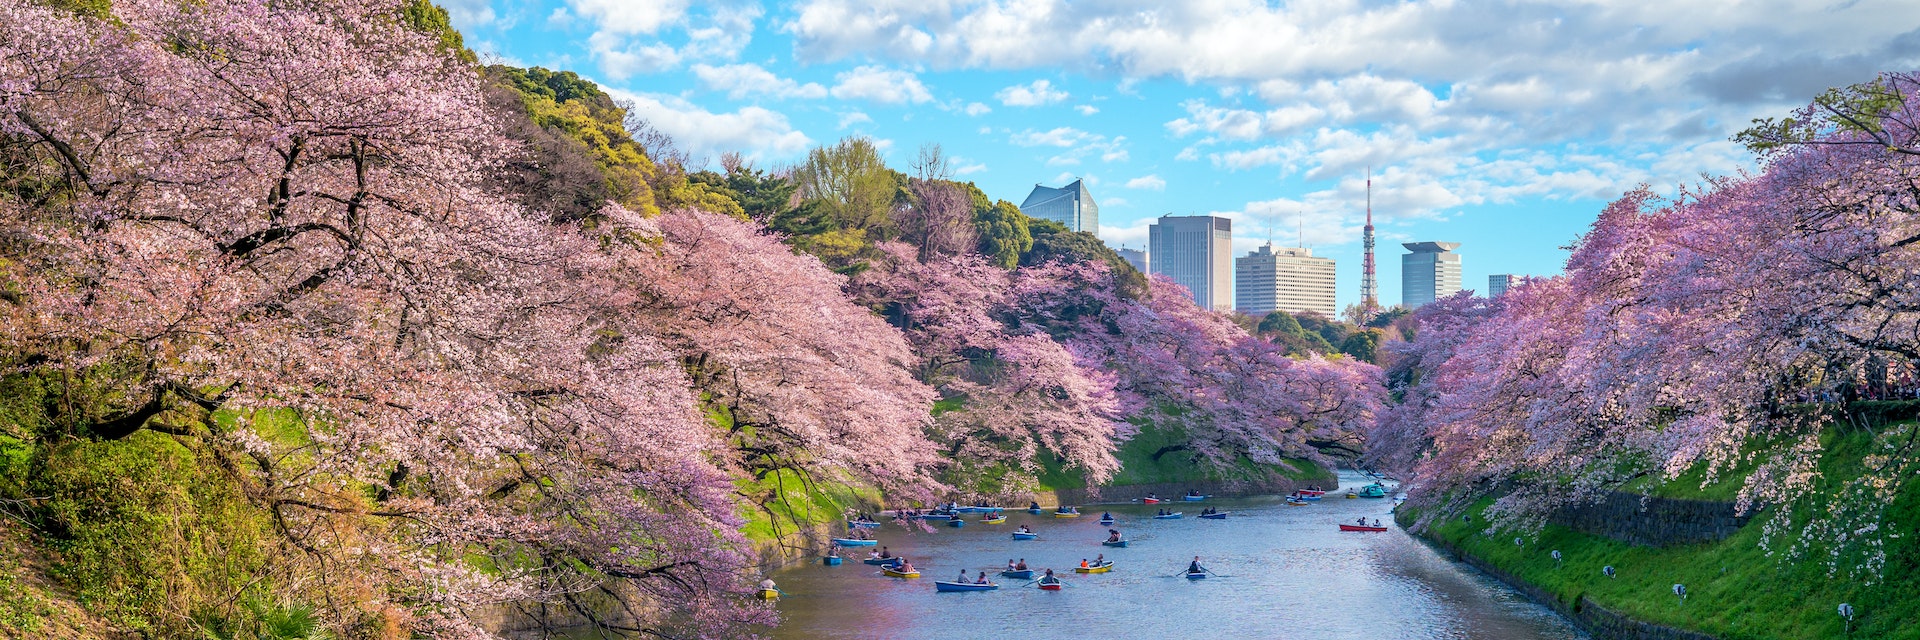 Many people paddle in boats near cherry blossoms at Chidorigafuchi Green Way in Tokyo.
